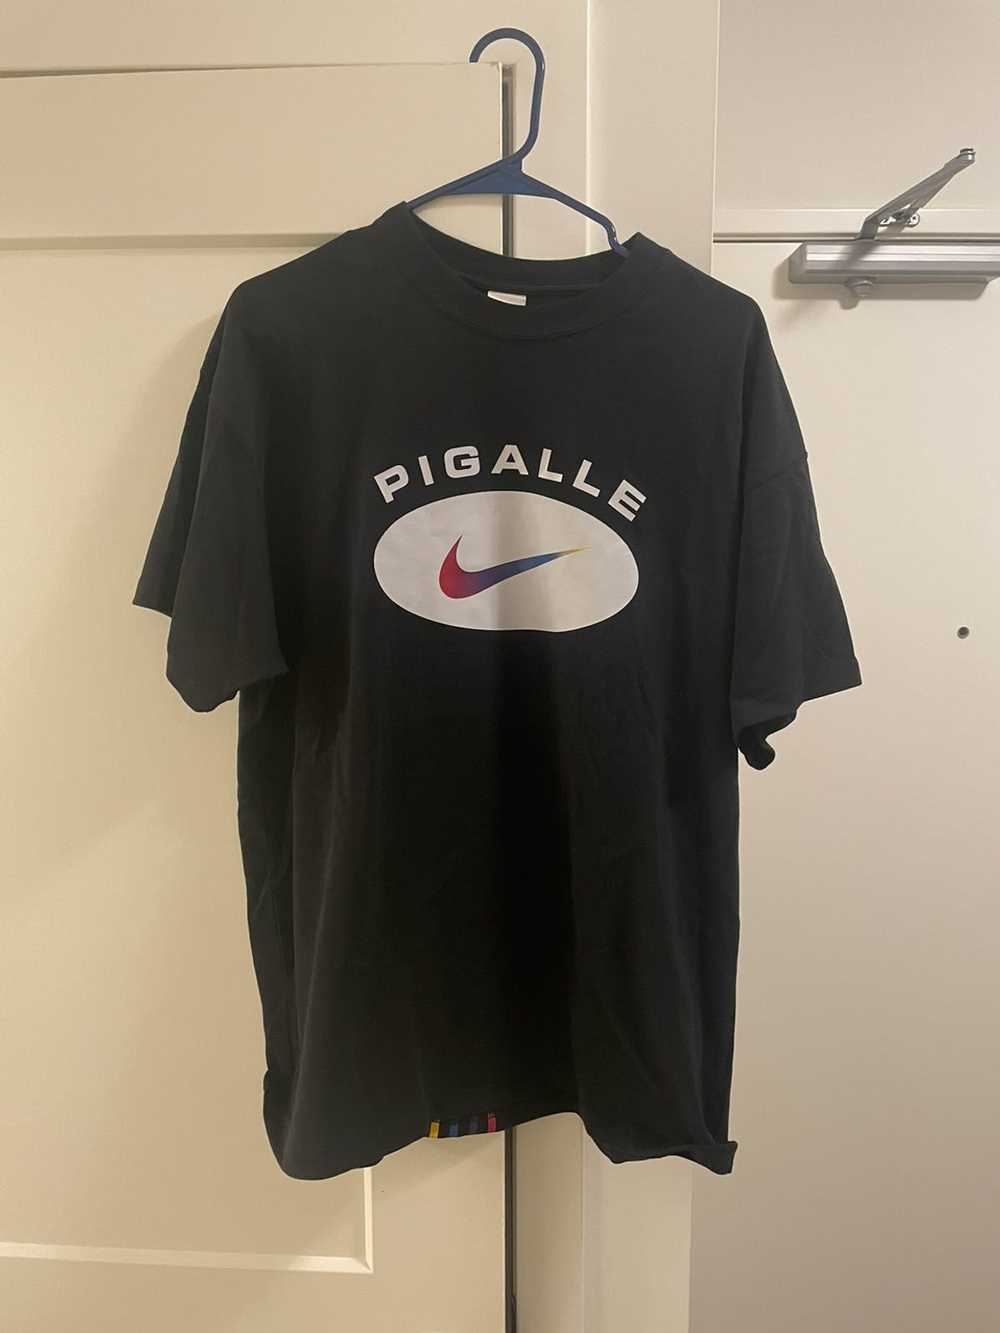 Nike × Pigalle Nike x Pigalle T-Shirt Black - image 1